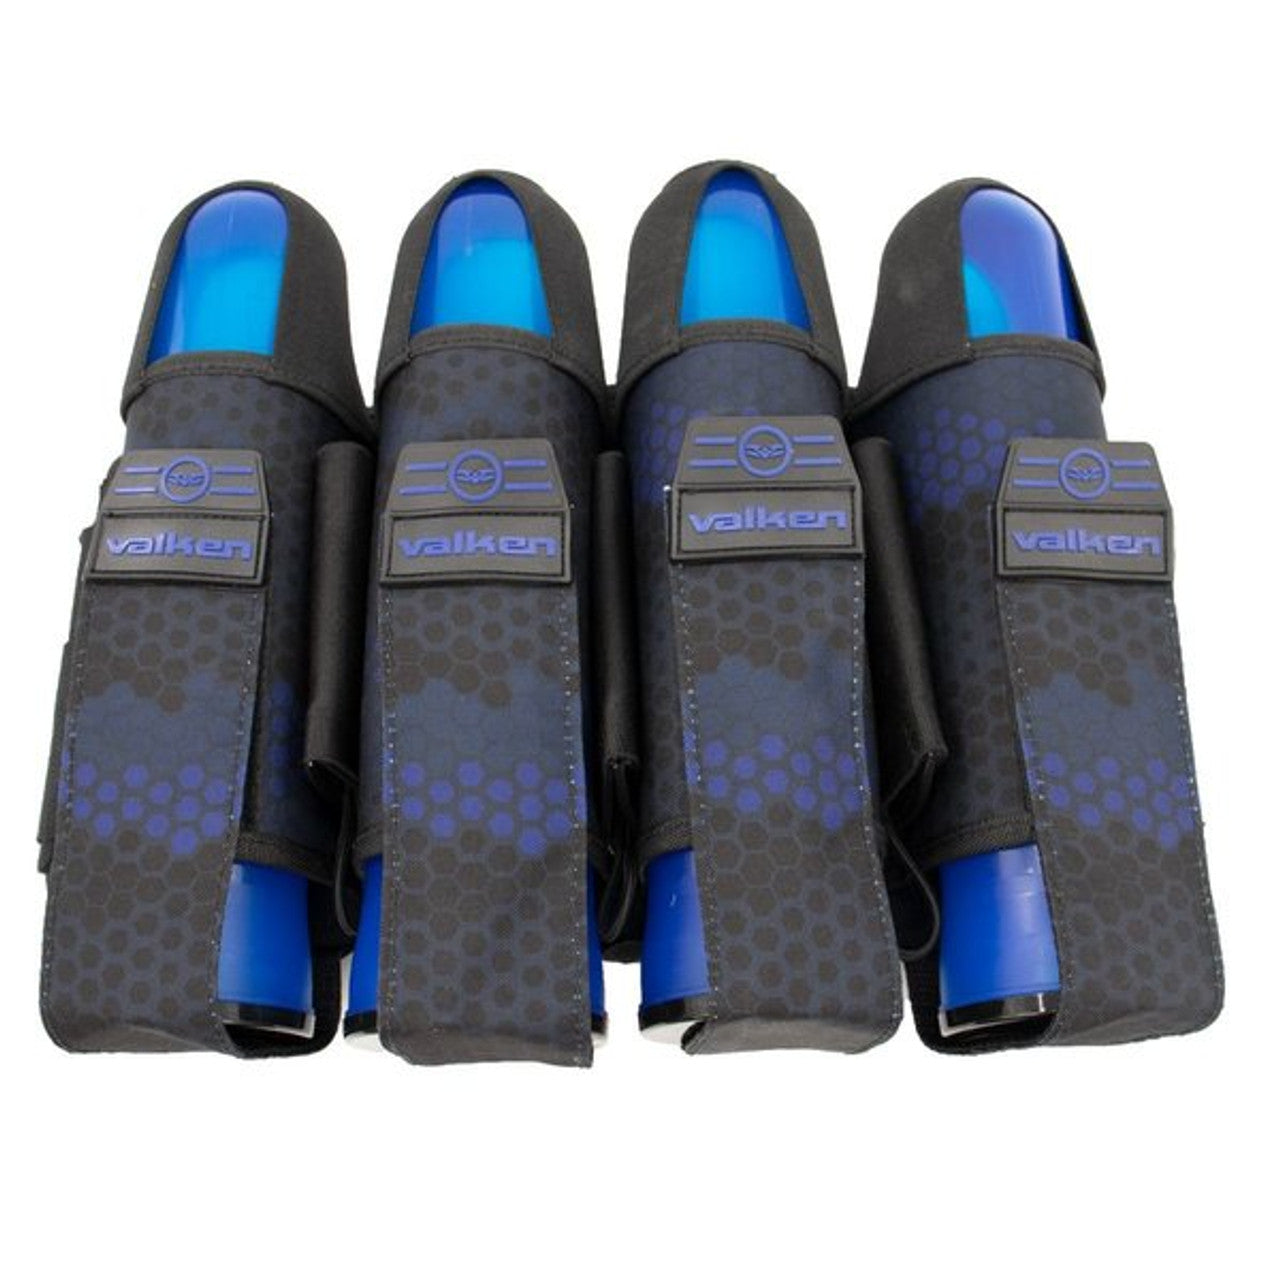 Valken Fate GFX 4+3 Paintball Harness - CHOOSE YOUR COLOR!